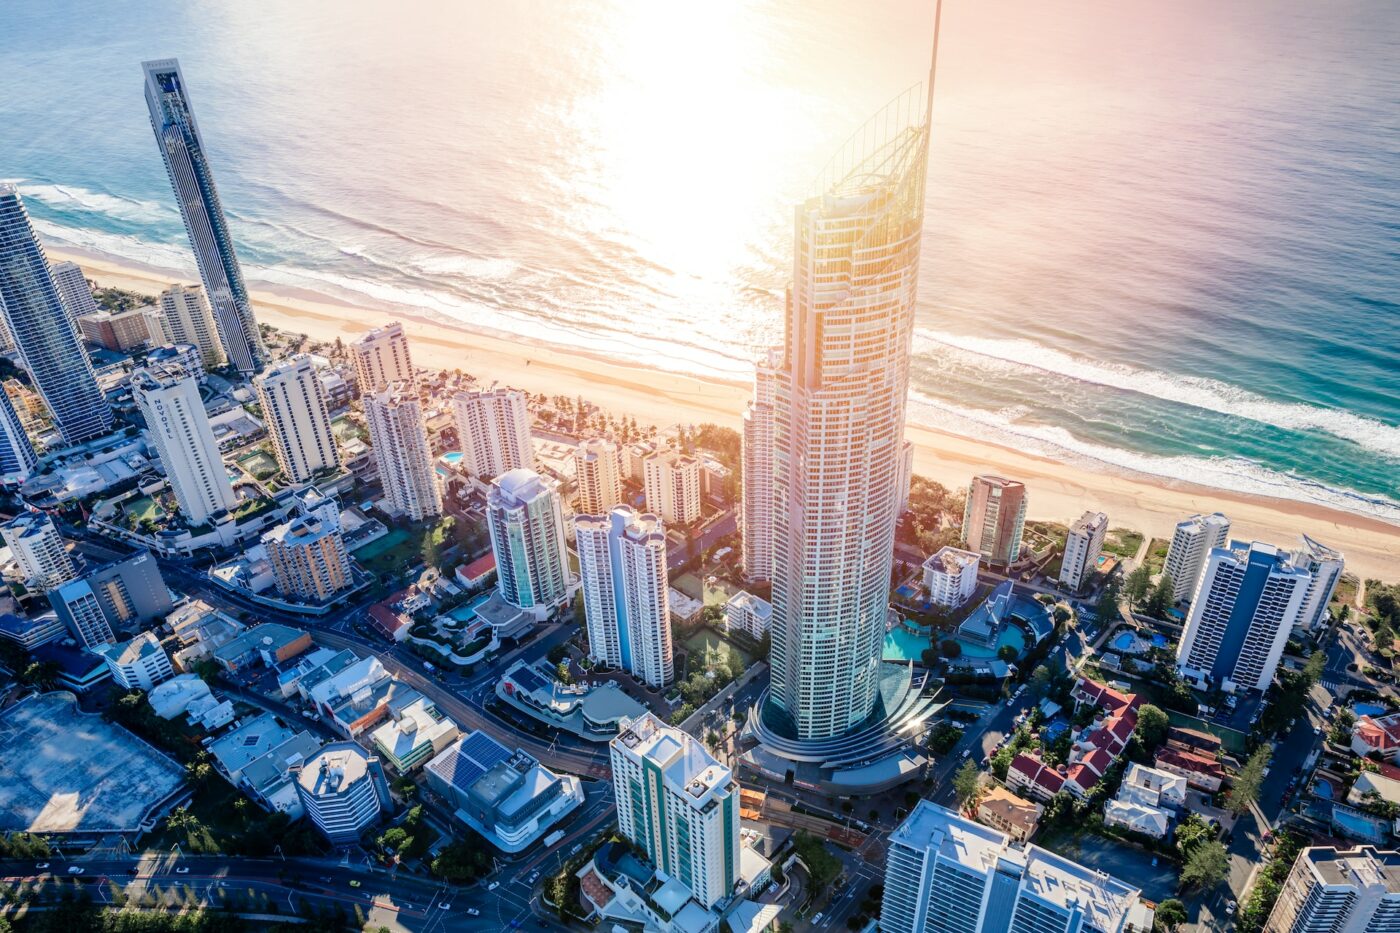  Surfer's paradise, beaches in Gold Coast